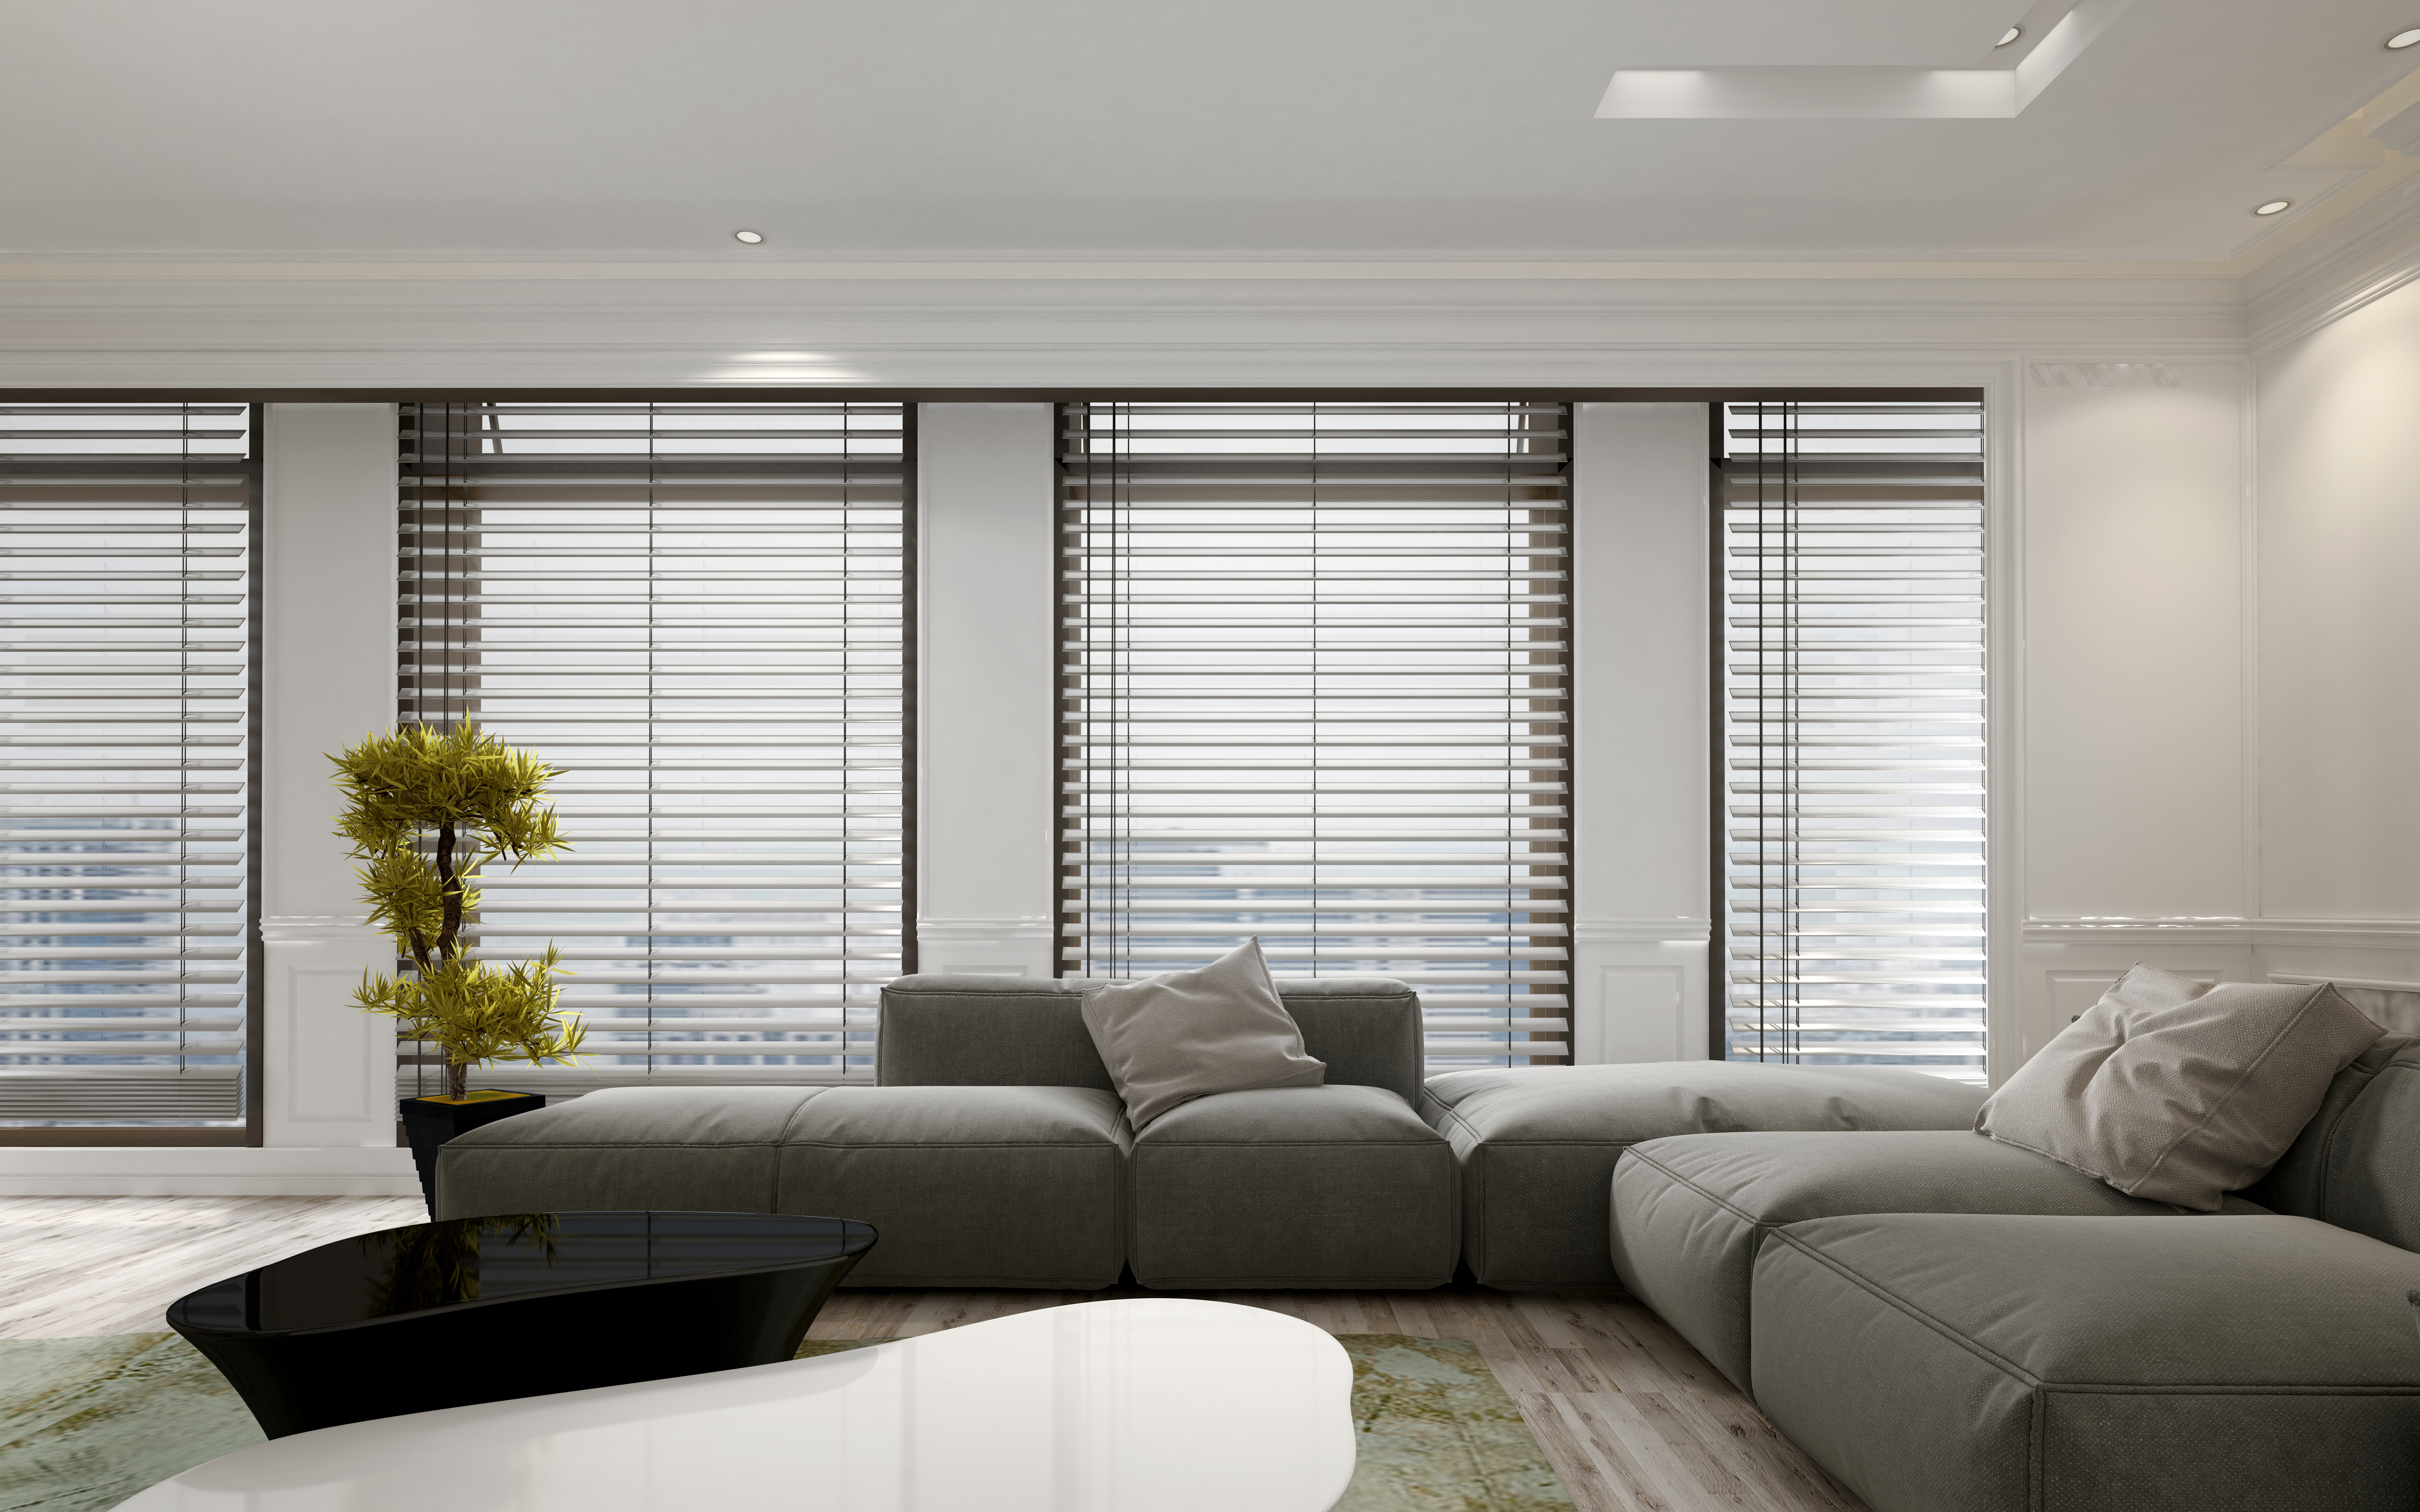 Blinds vs. Shades: what's the Difference?